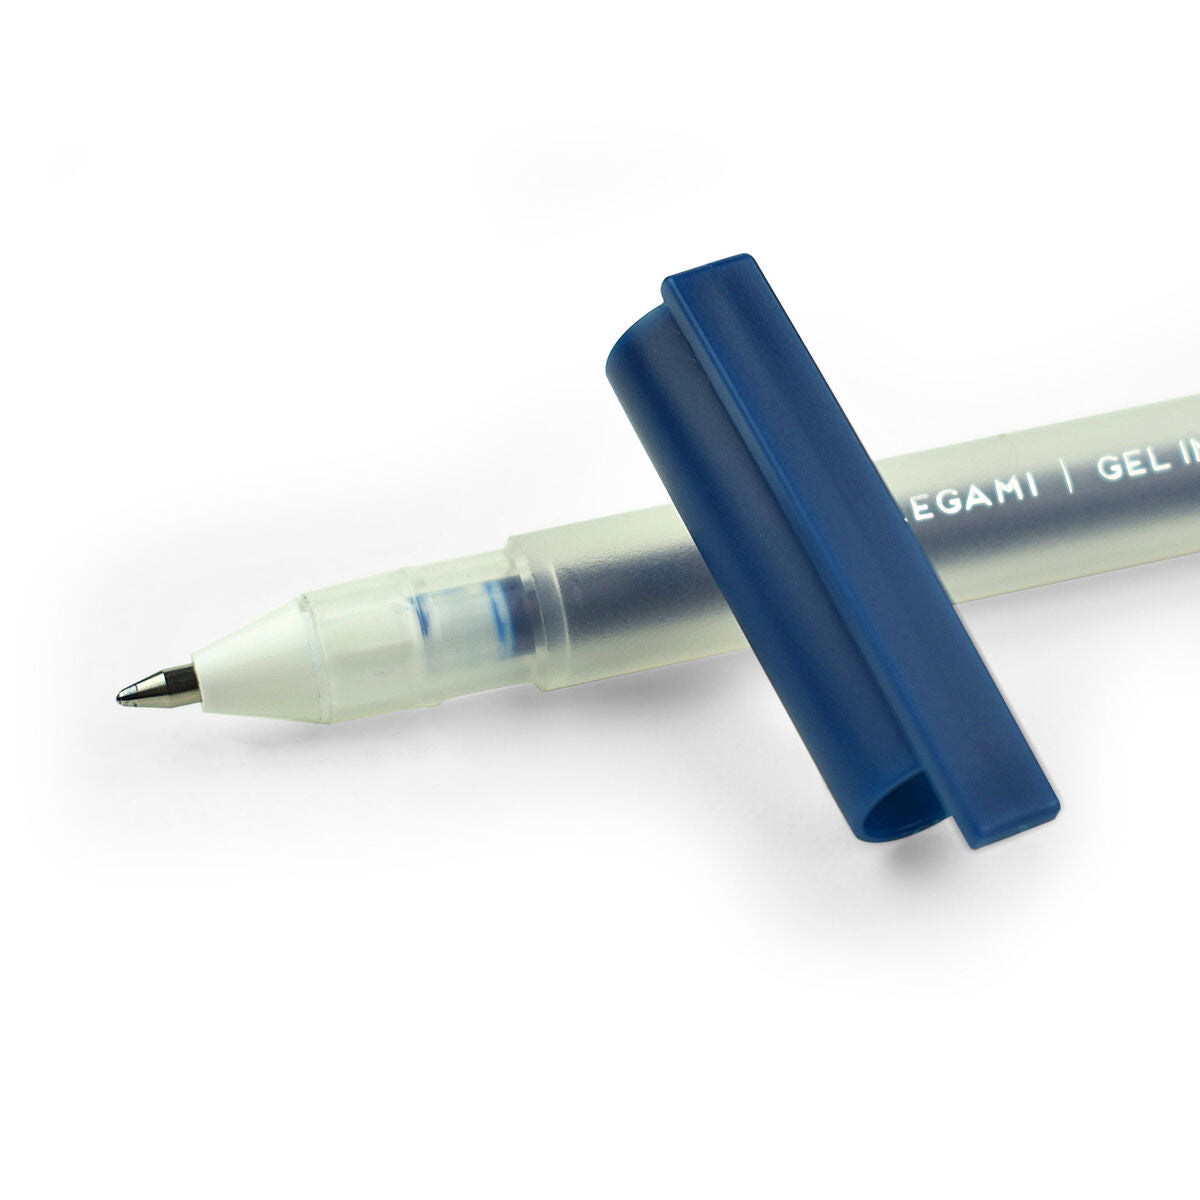 Back to School | Legami Gel Ink Pen Blue by Weirs of Baggot St